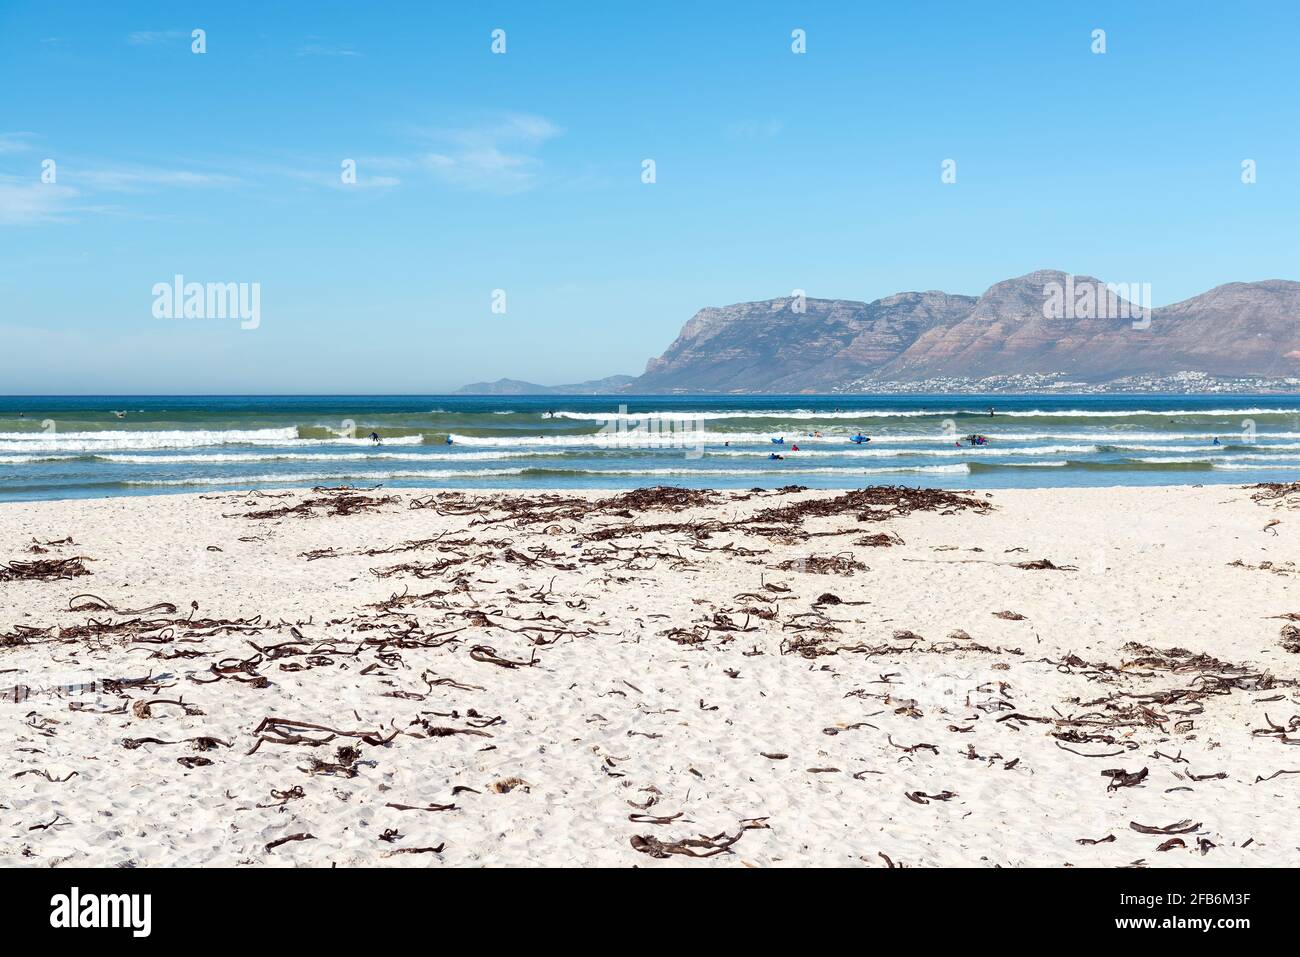 South African people surfing in the waves near Cape Town with Table Mountain background, Muizenberg Beach, South Africa. Stock Photo